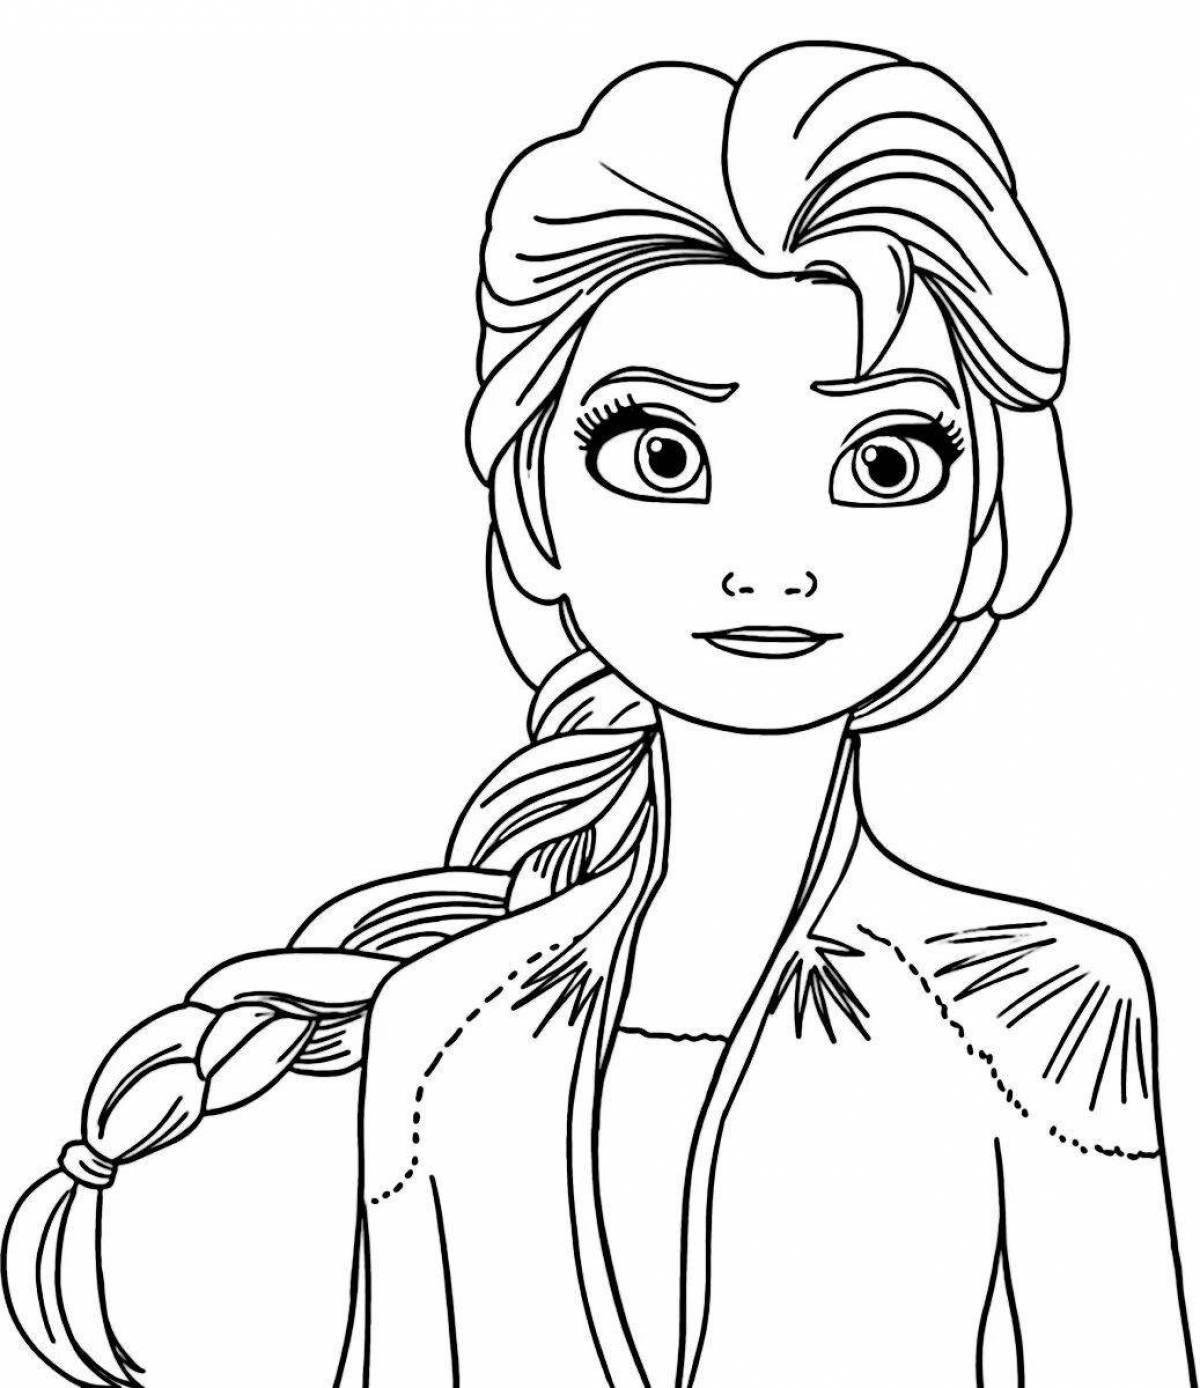 Amazing coloring page 2 for girls